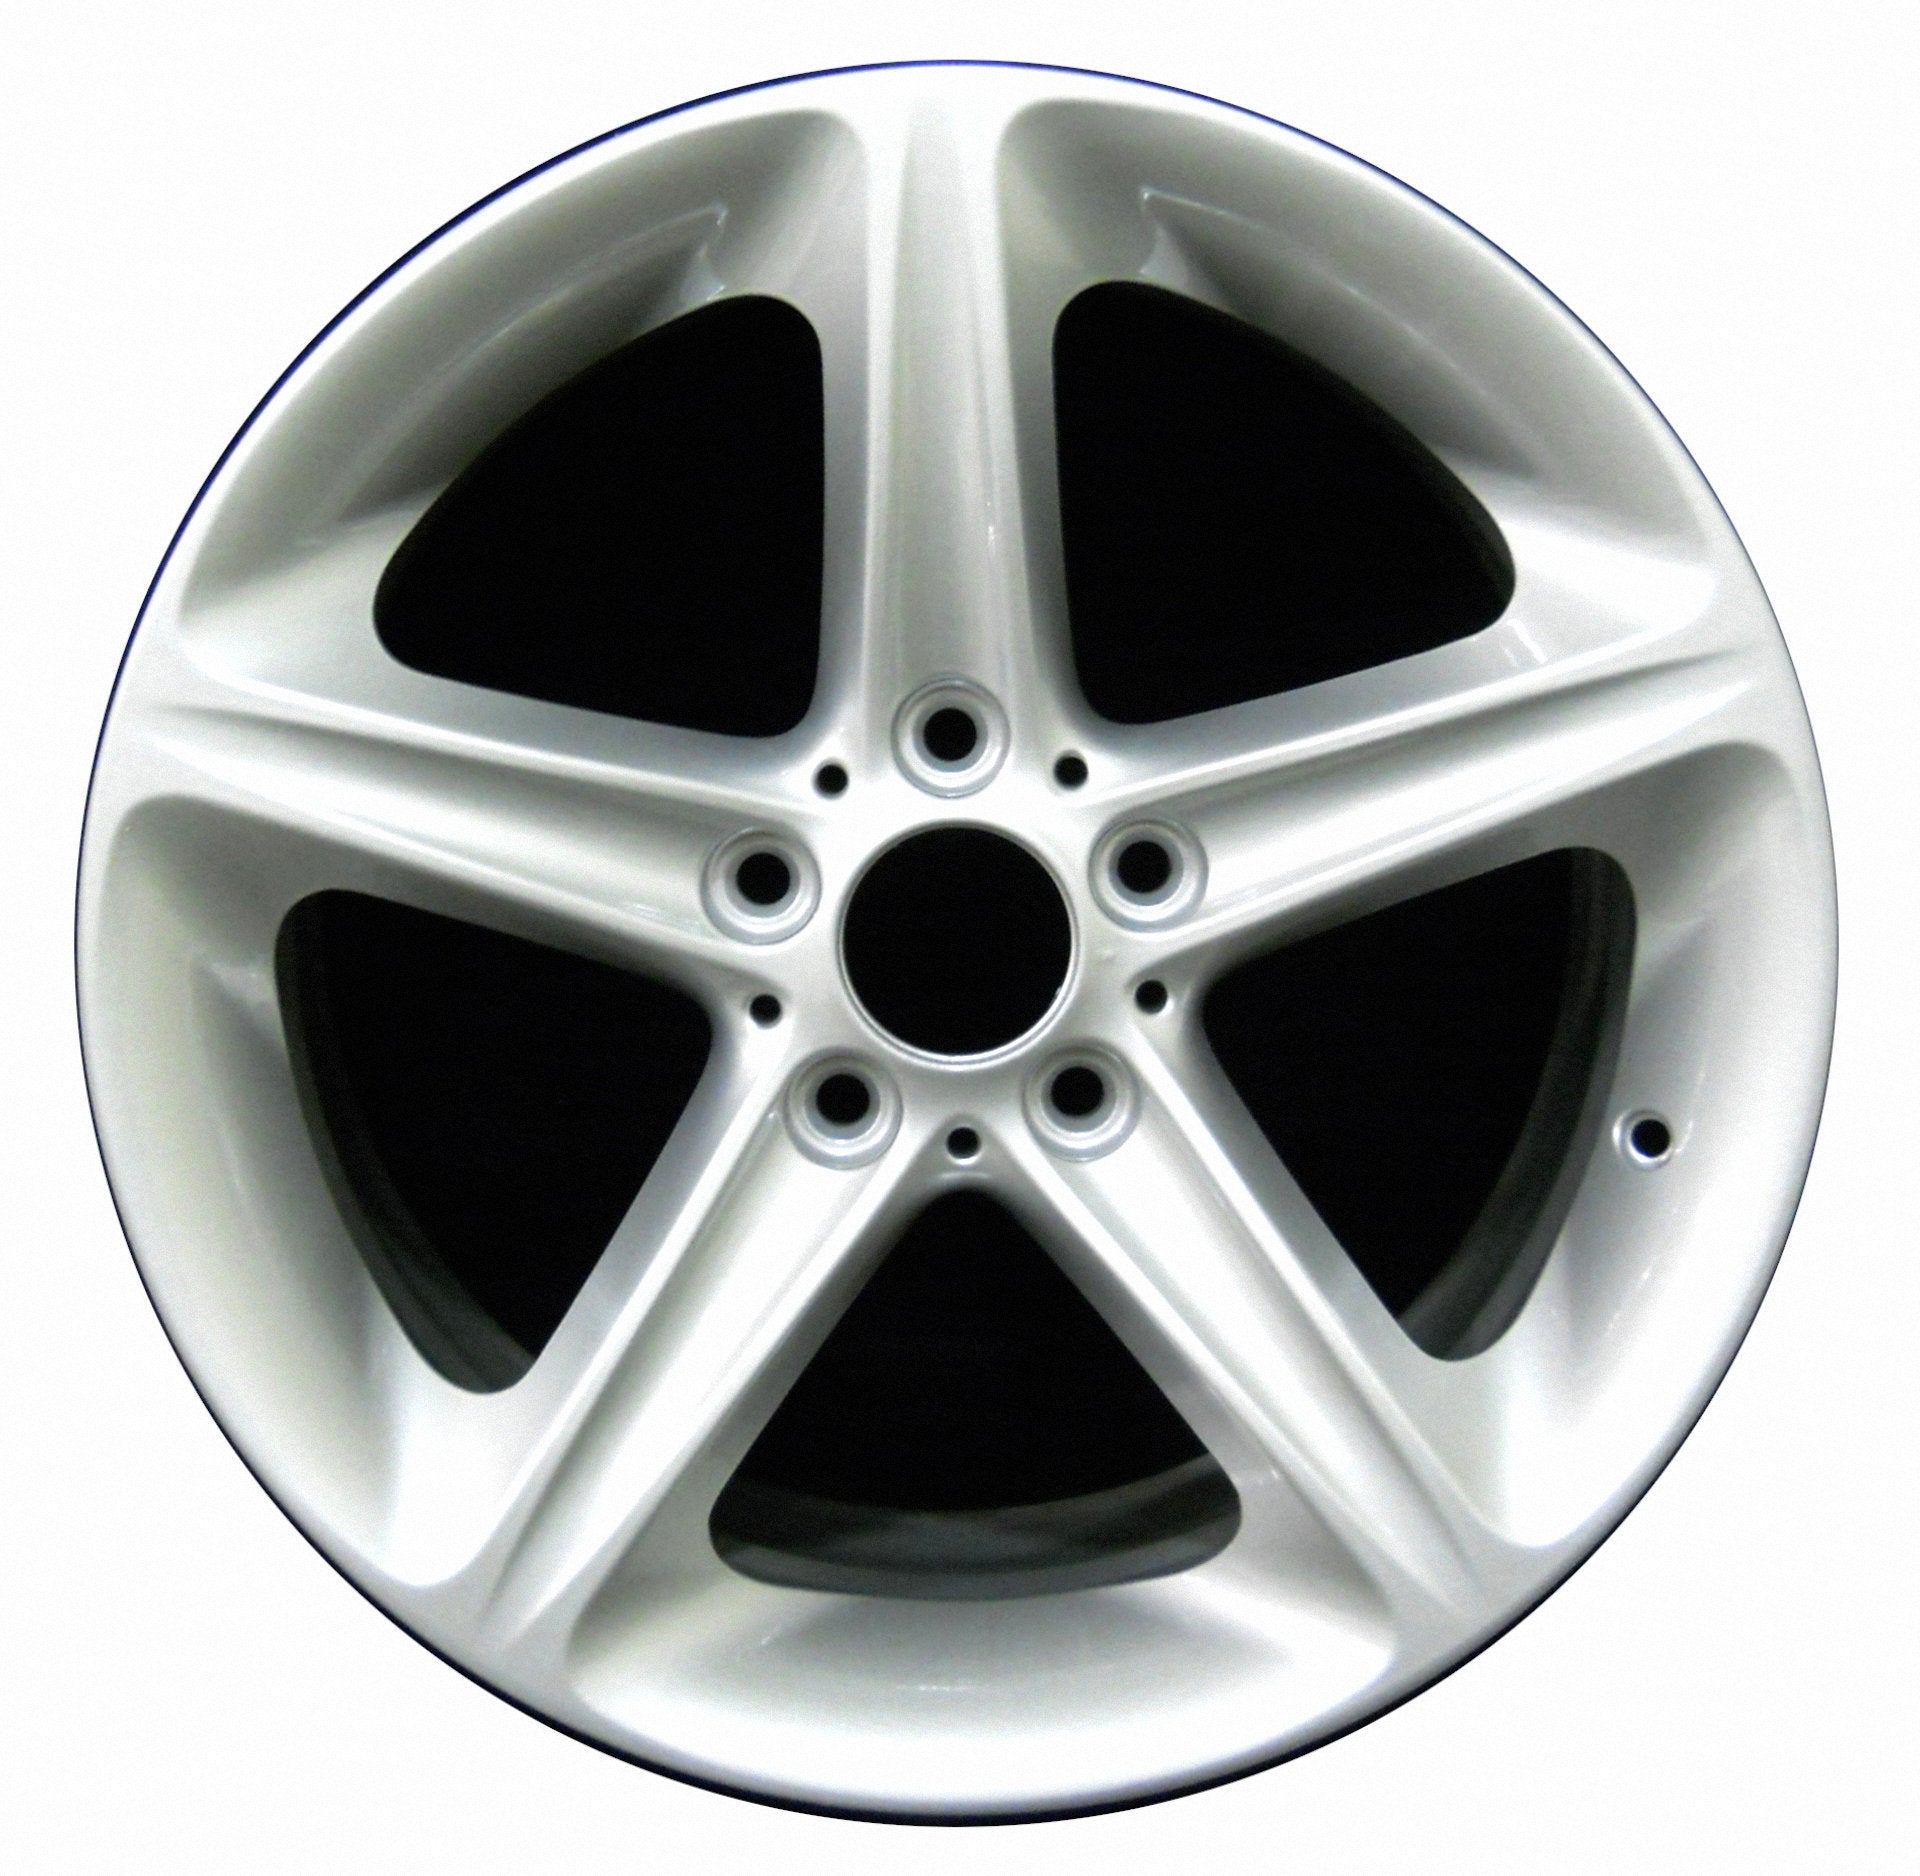 BMW 128i  2008, 2009, 2010, 2011, 2012, 2013 Factory OEM Car Wheel Size 18x7.5 Alloy WAO.71260FT.PS10.FF